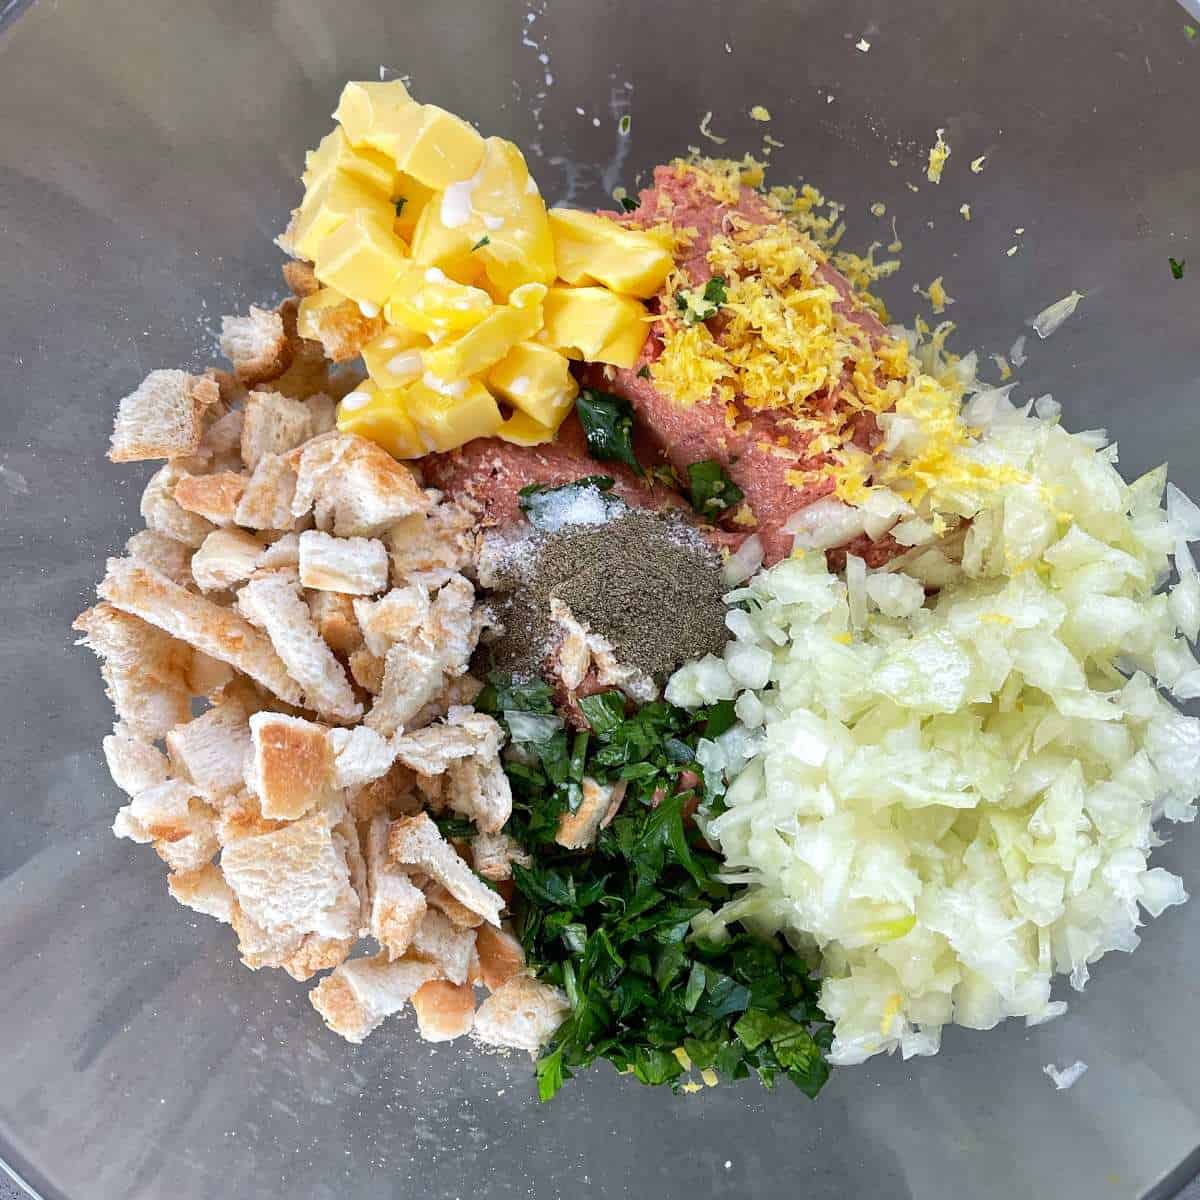 All of the chopped ingredients for the stuffing in a glass bowl.